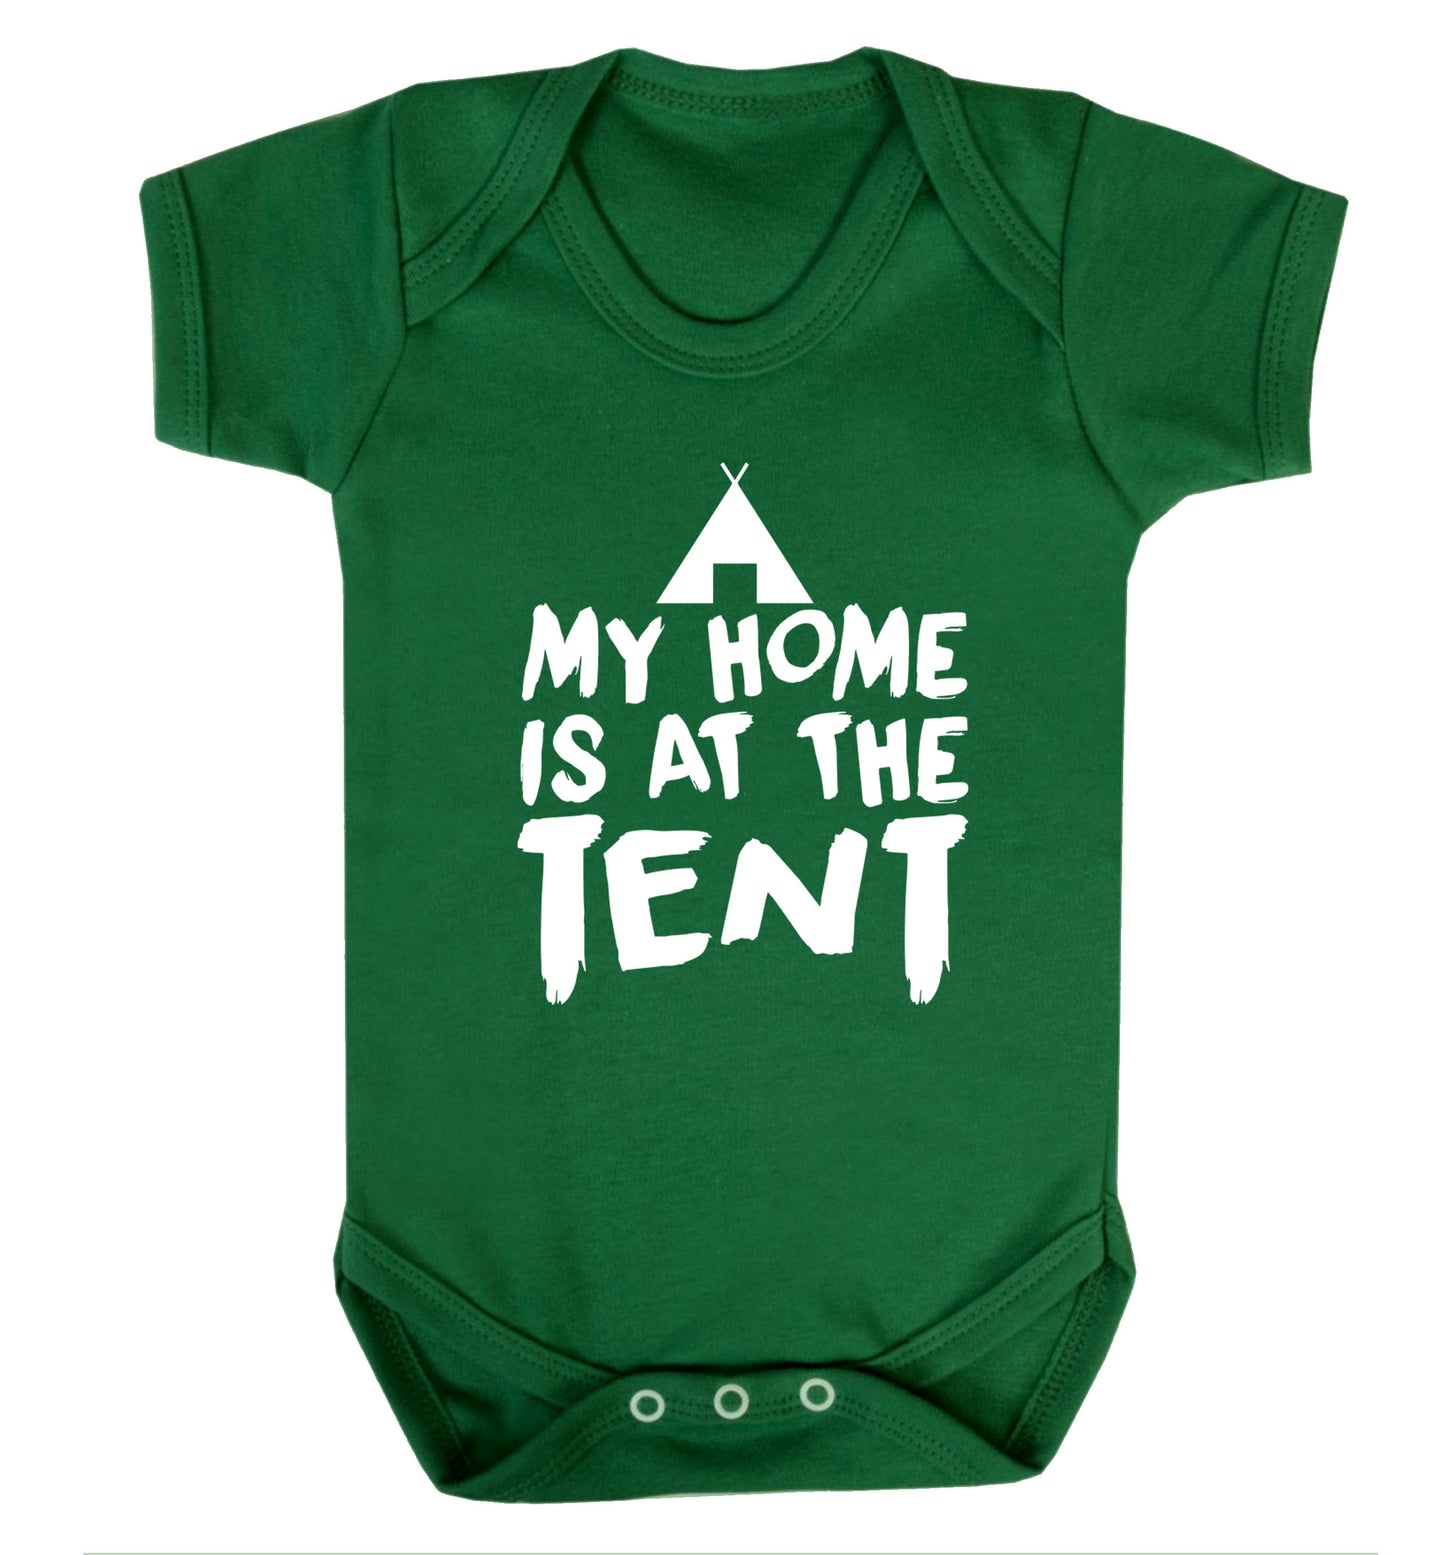 My home is at the tent Baby Vest green 18-24 months